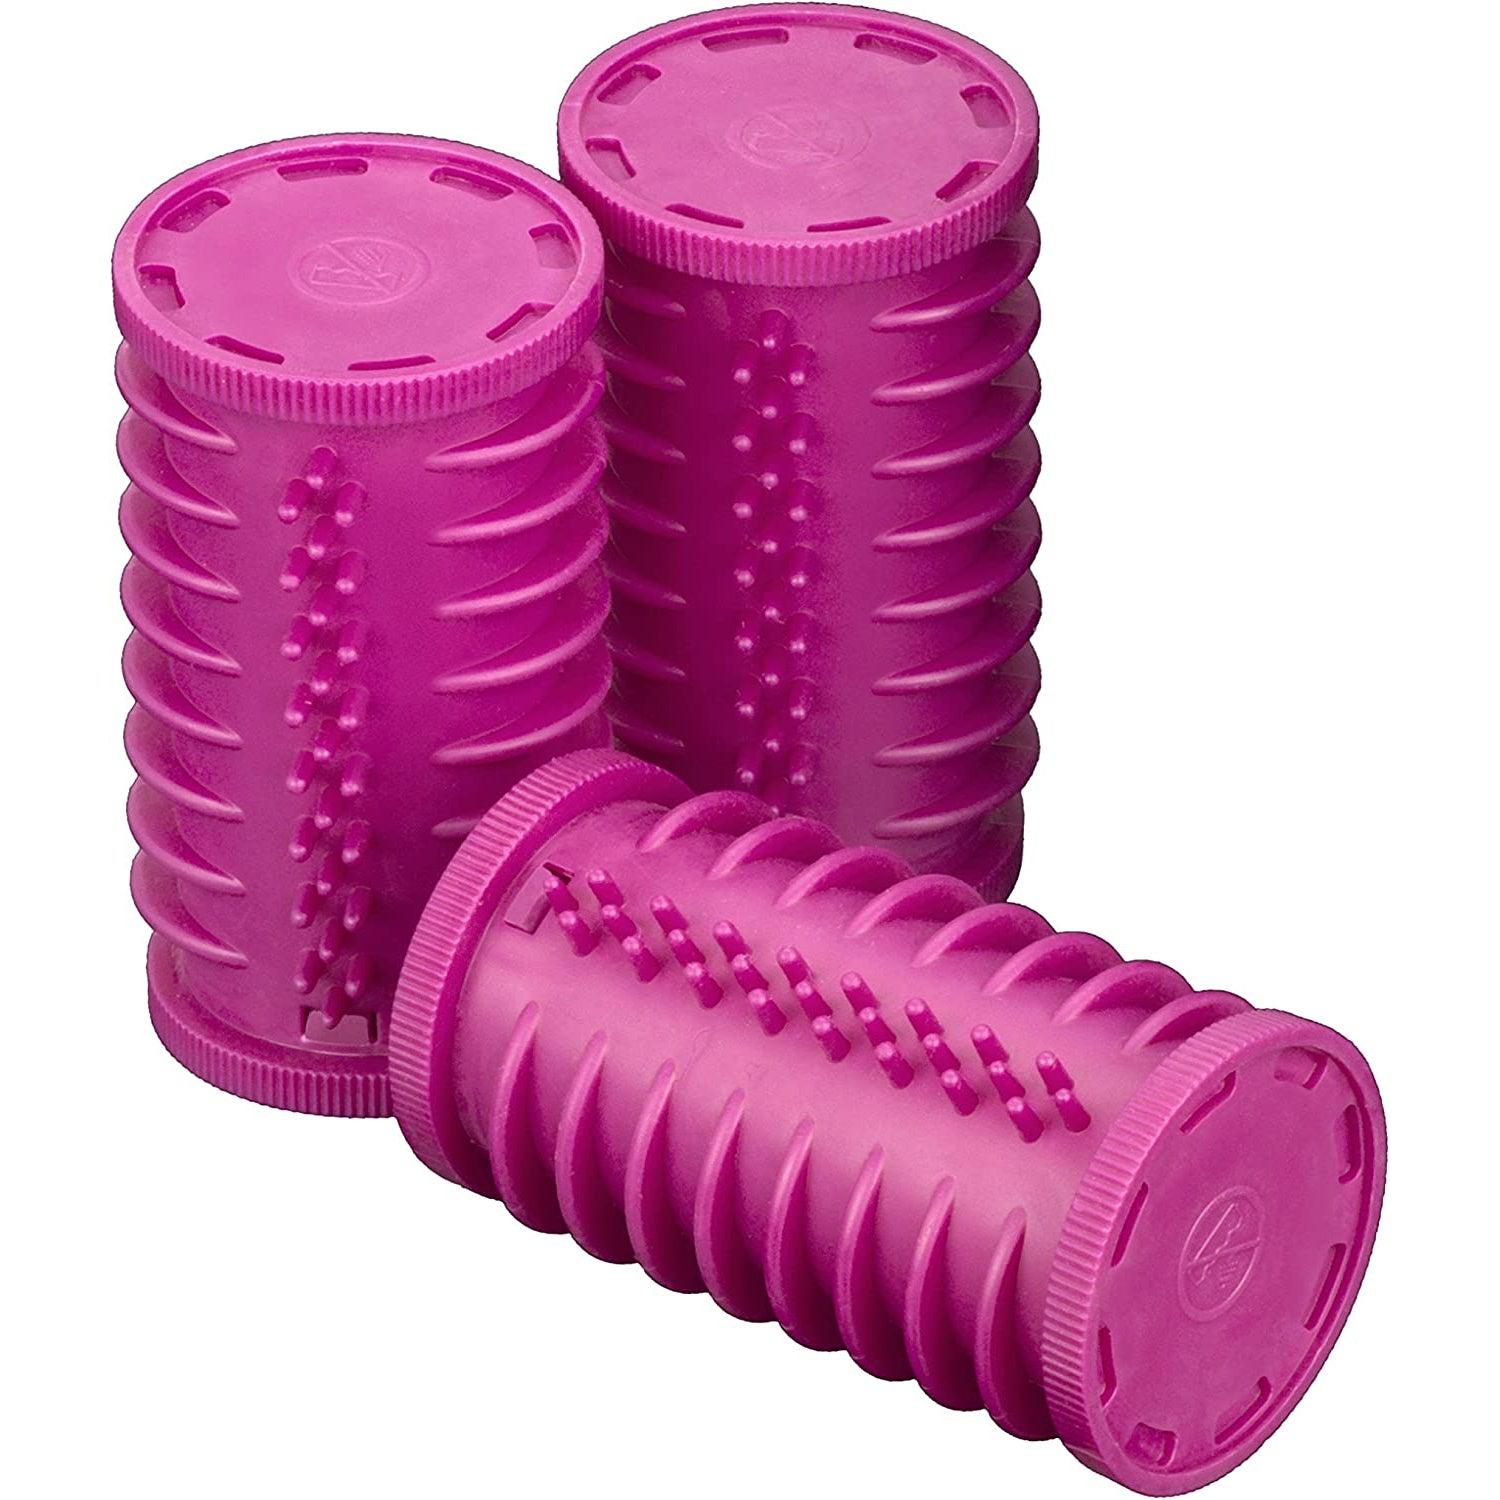 TRESemme Body & Volume Rollers , For Long Lasting Volume & Curls - Pink 3039U - Healthxpress.ie